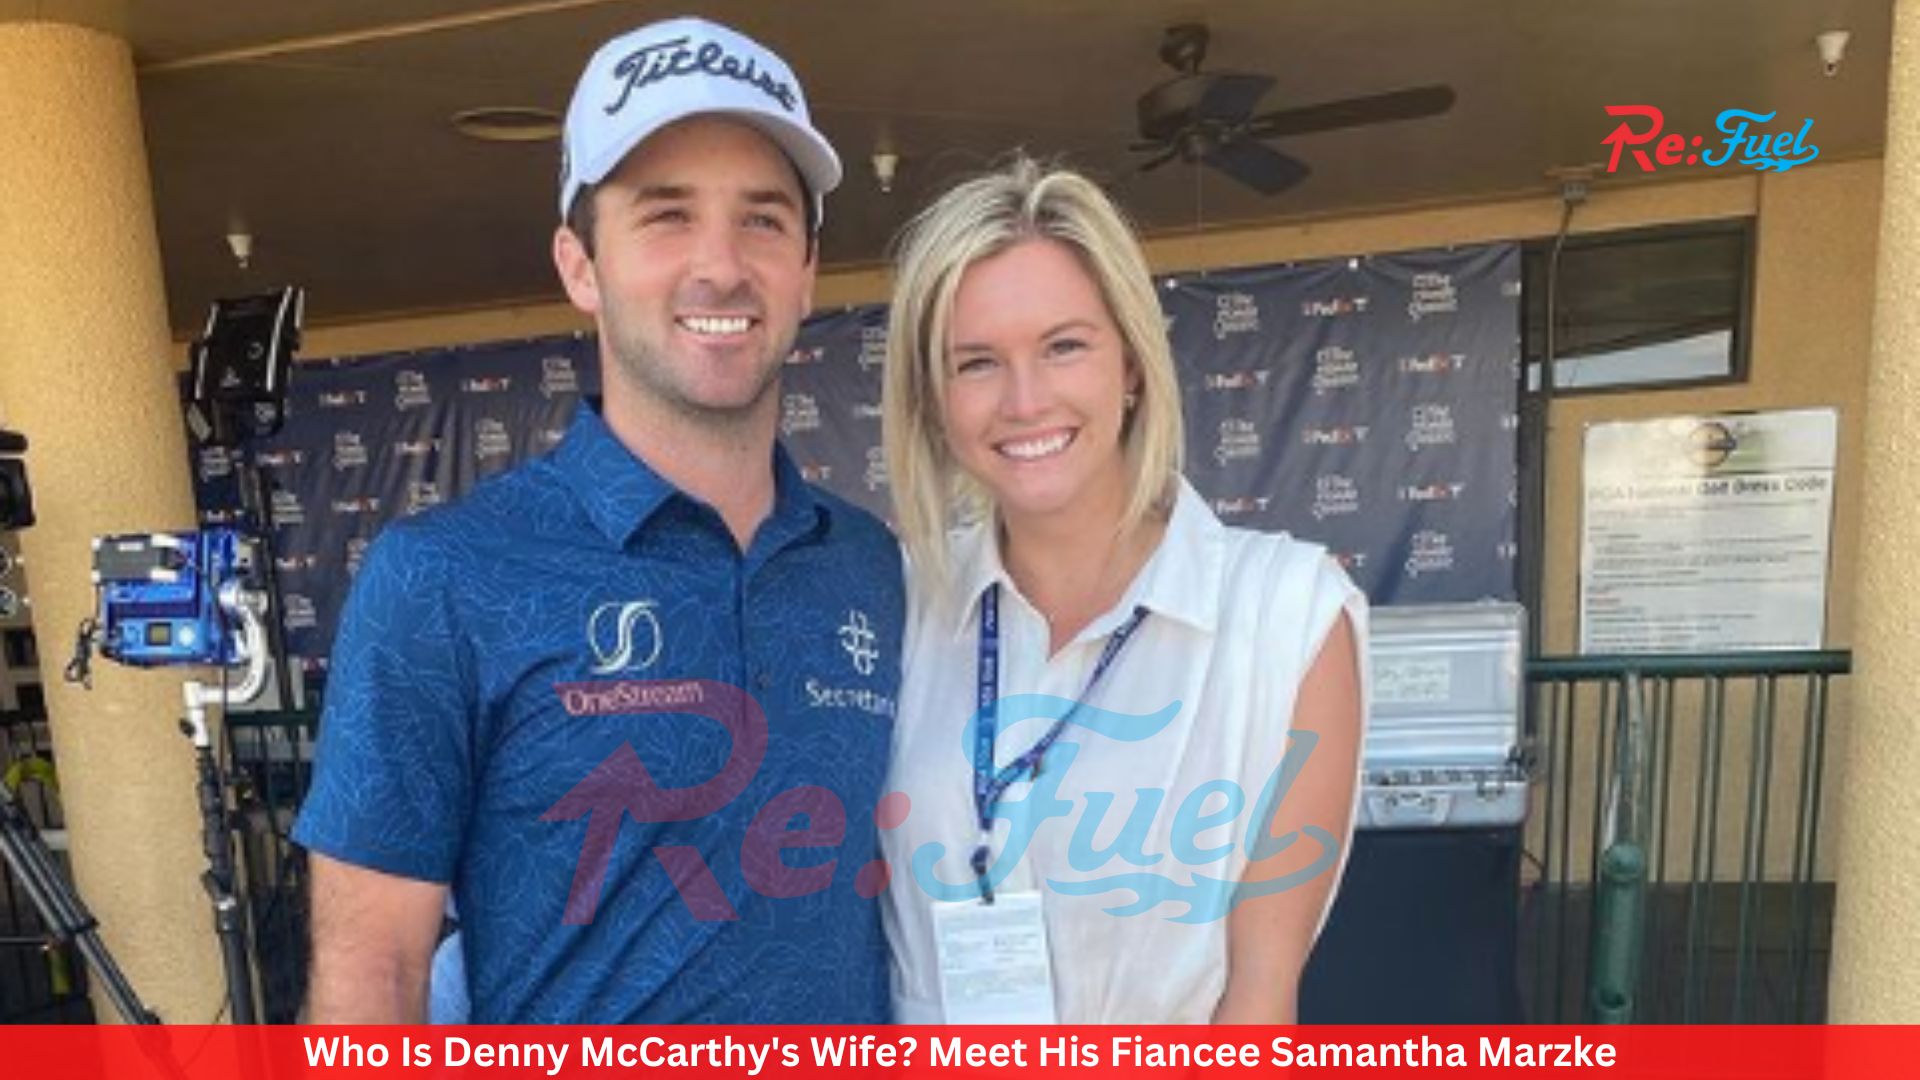 Who Is Denny McCarthy's Wife? Meet His Fiancee Samantha Marzke